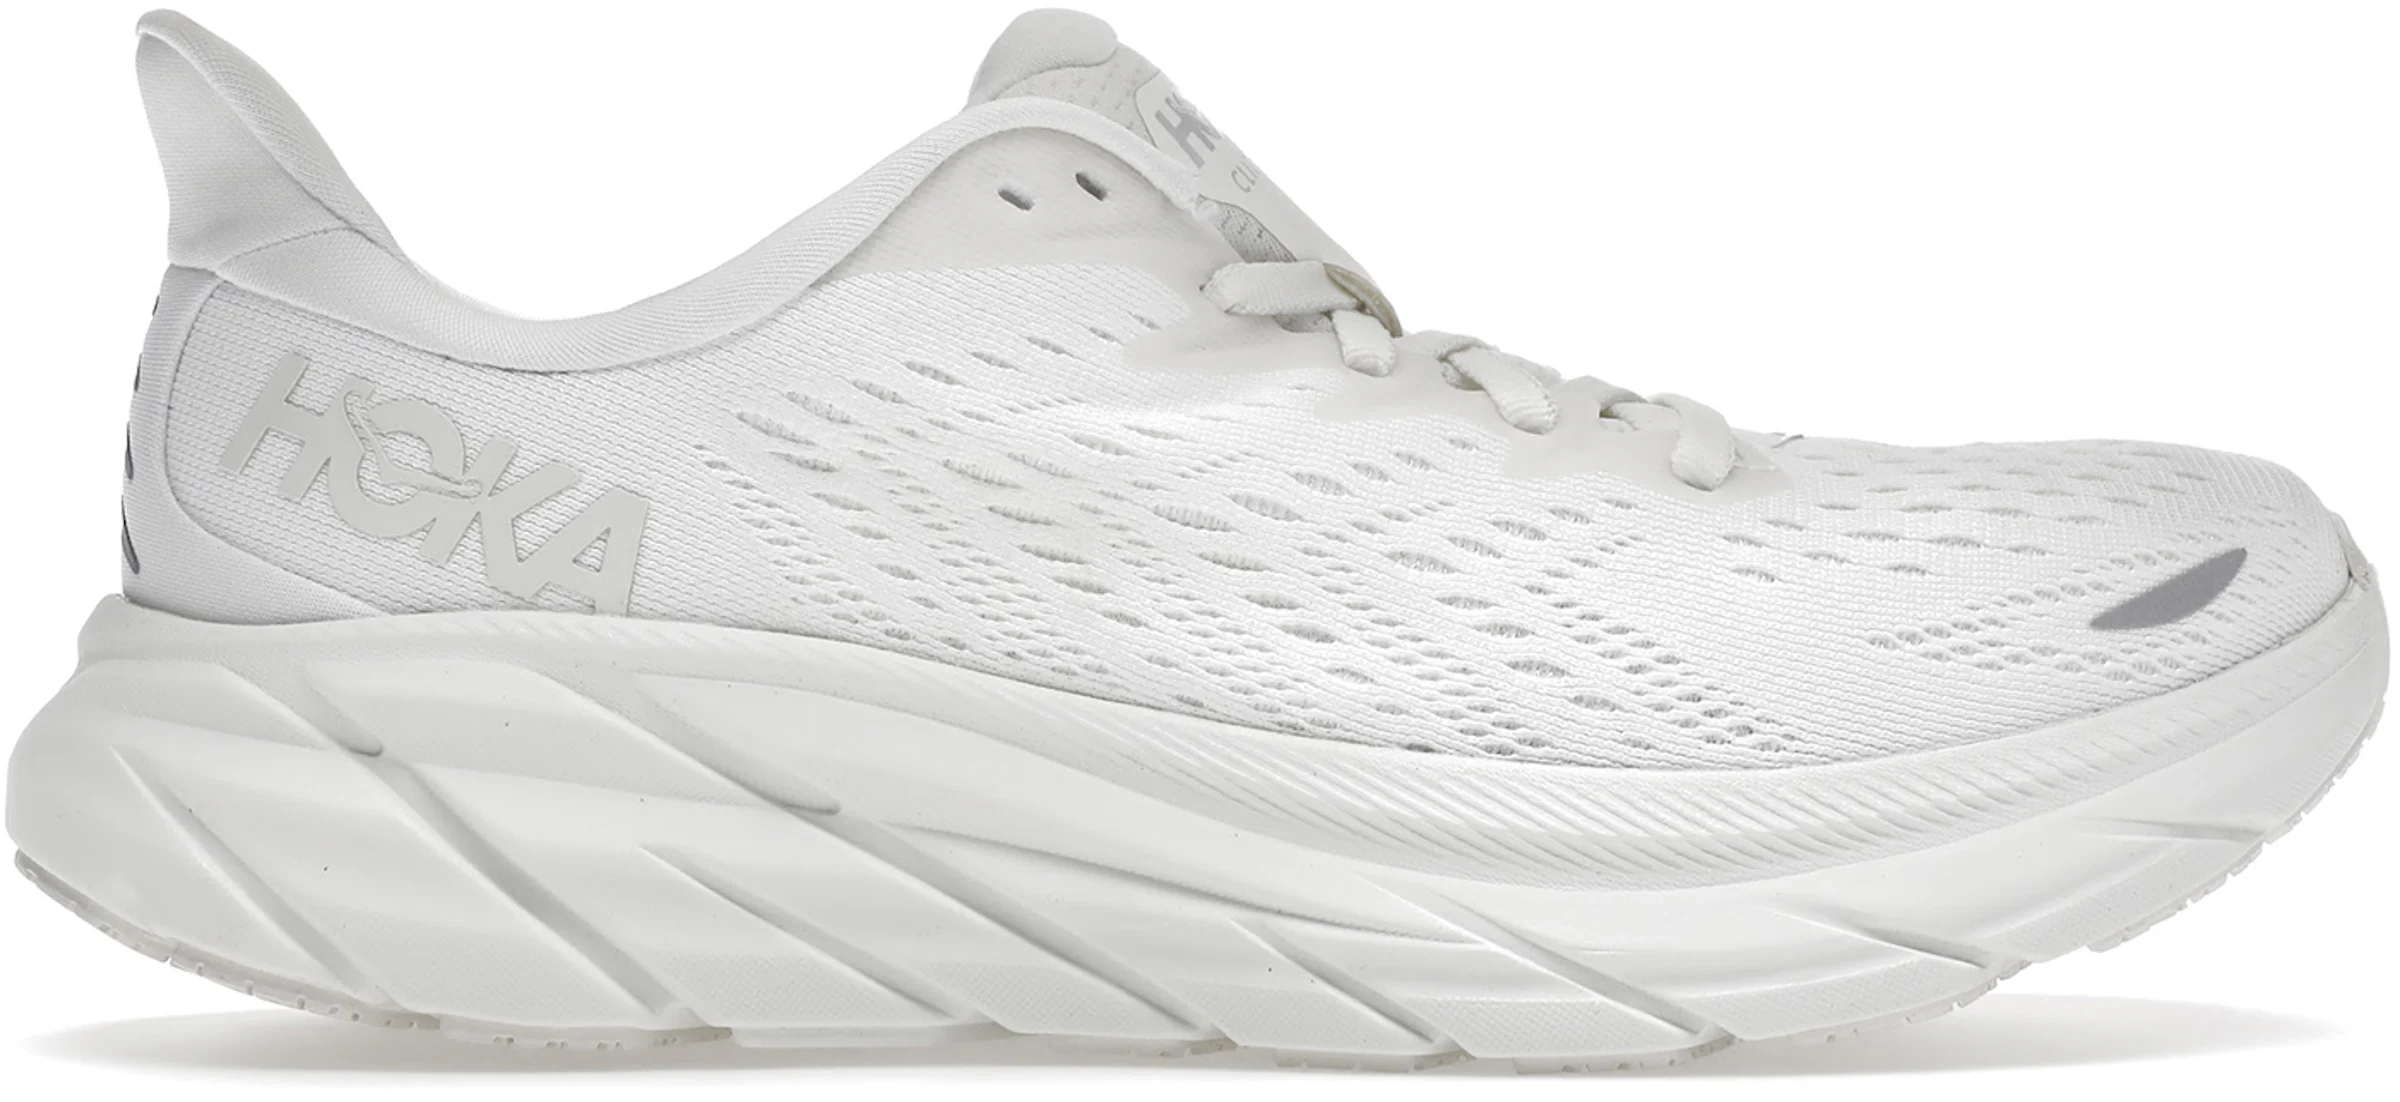 https://images.stockx.com/images/Hoka-One-One-Clifton-8-White-W-Product.jpg?fit=fill&bg=FFFFFF&w=1200&h=857&fm=webp&auto=compress&dpr=2&trim=color&updated_at=1661436173&q=60